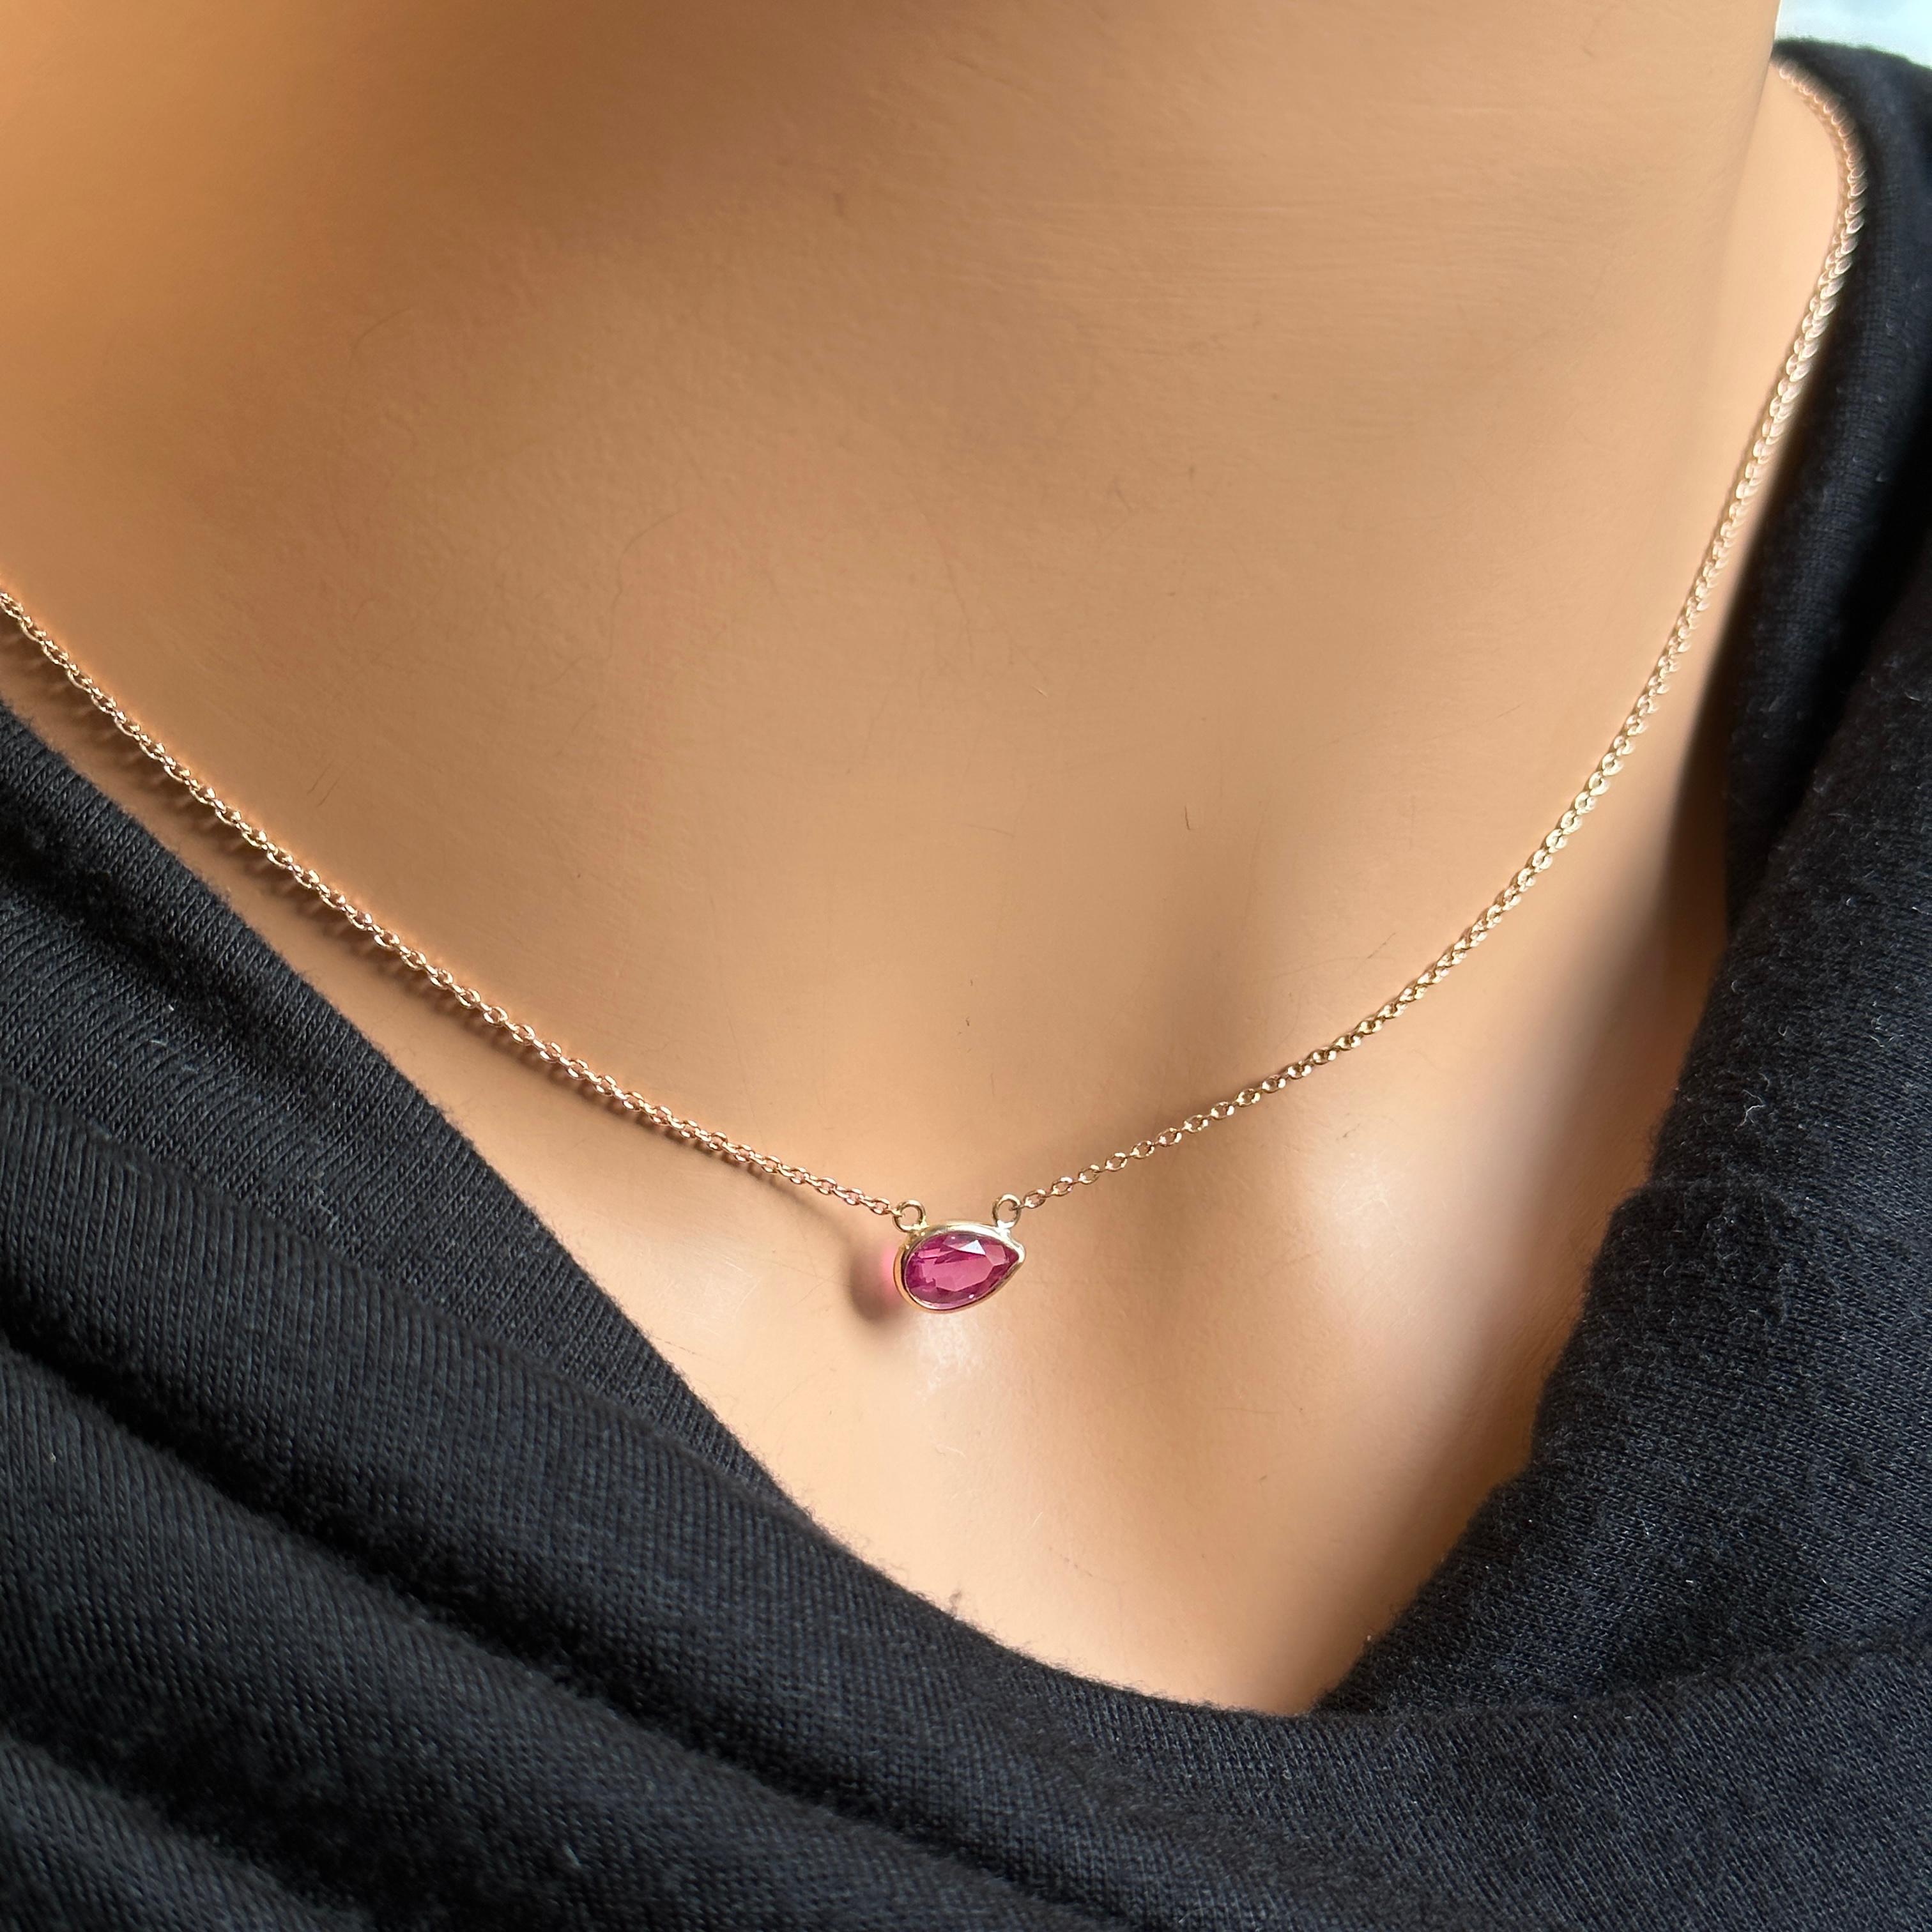 Contemporary 1.17 Ct Certified Pink Sapphire Pear Cut Solitaire Necklace in 14k RG For Sale